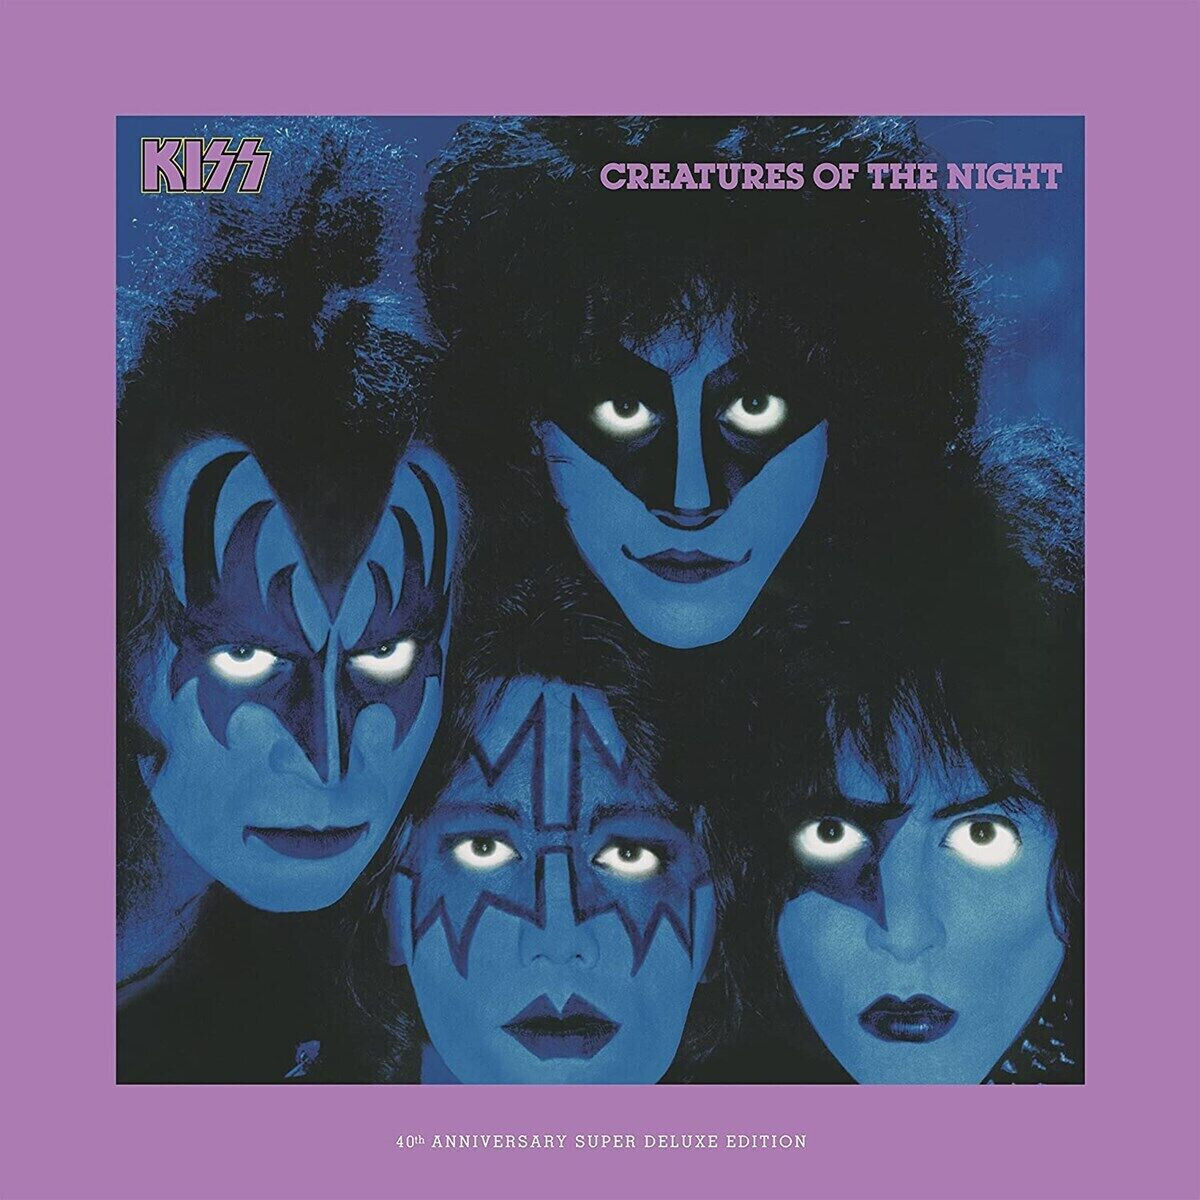 Listen To Banging Demo Version Of "Not For The Innocent" From KISS' Creatures Of The Night 40th Anniversary Set